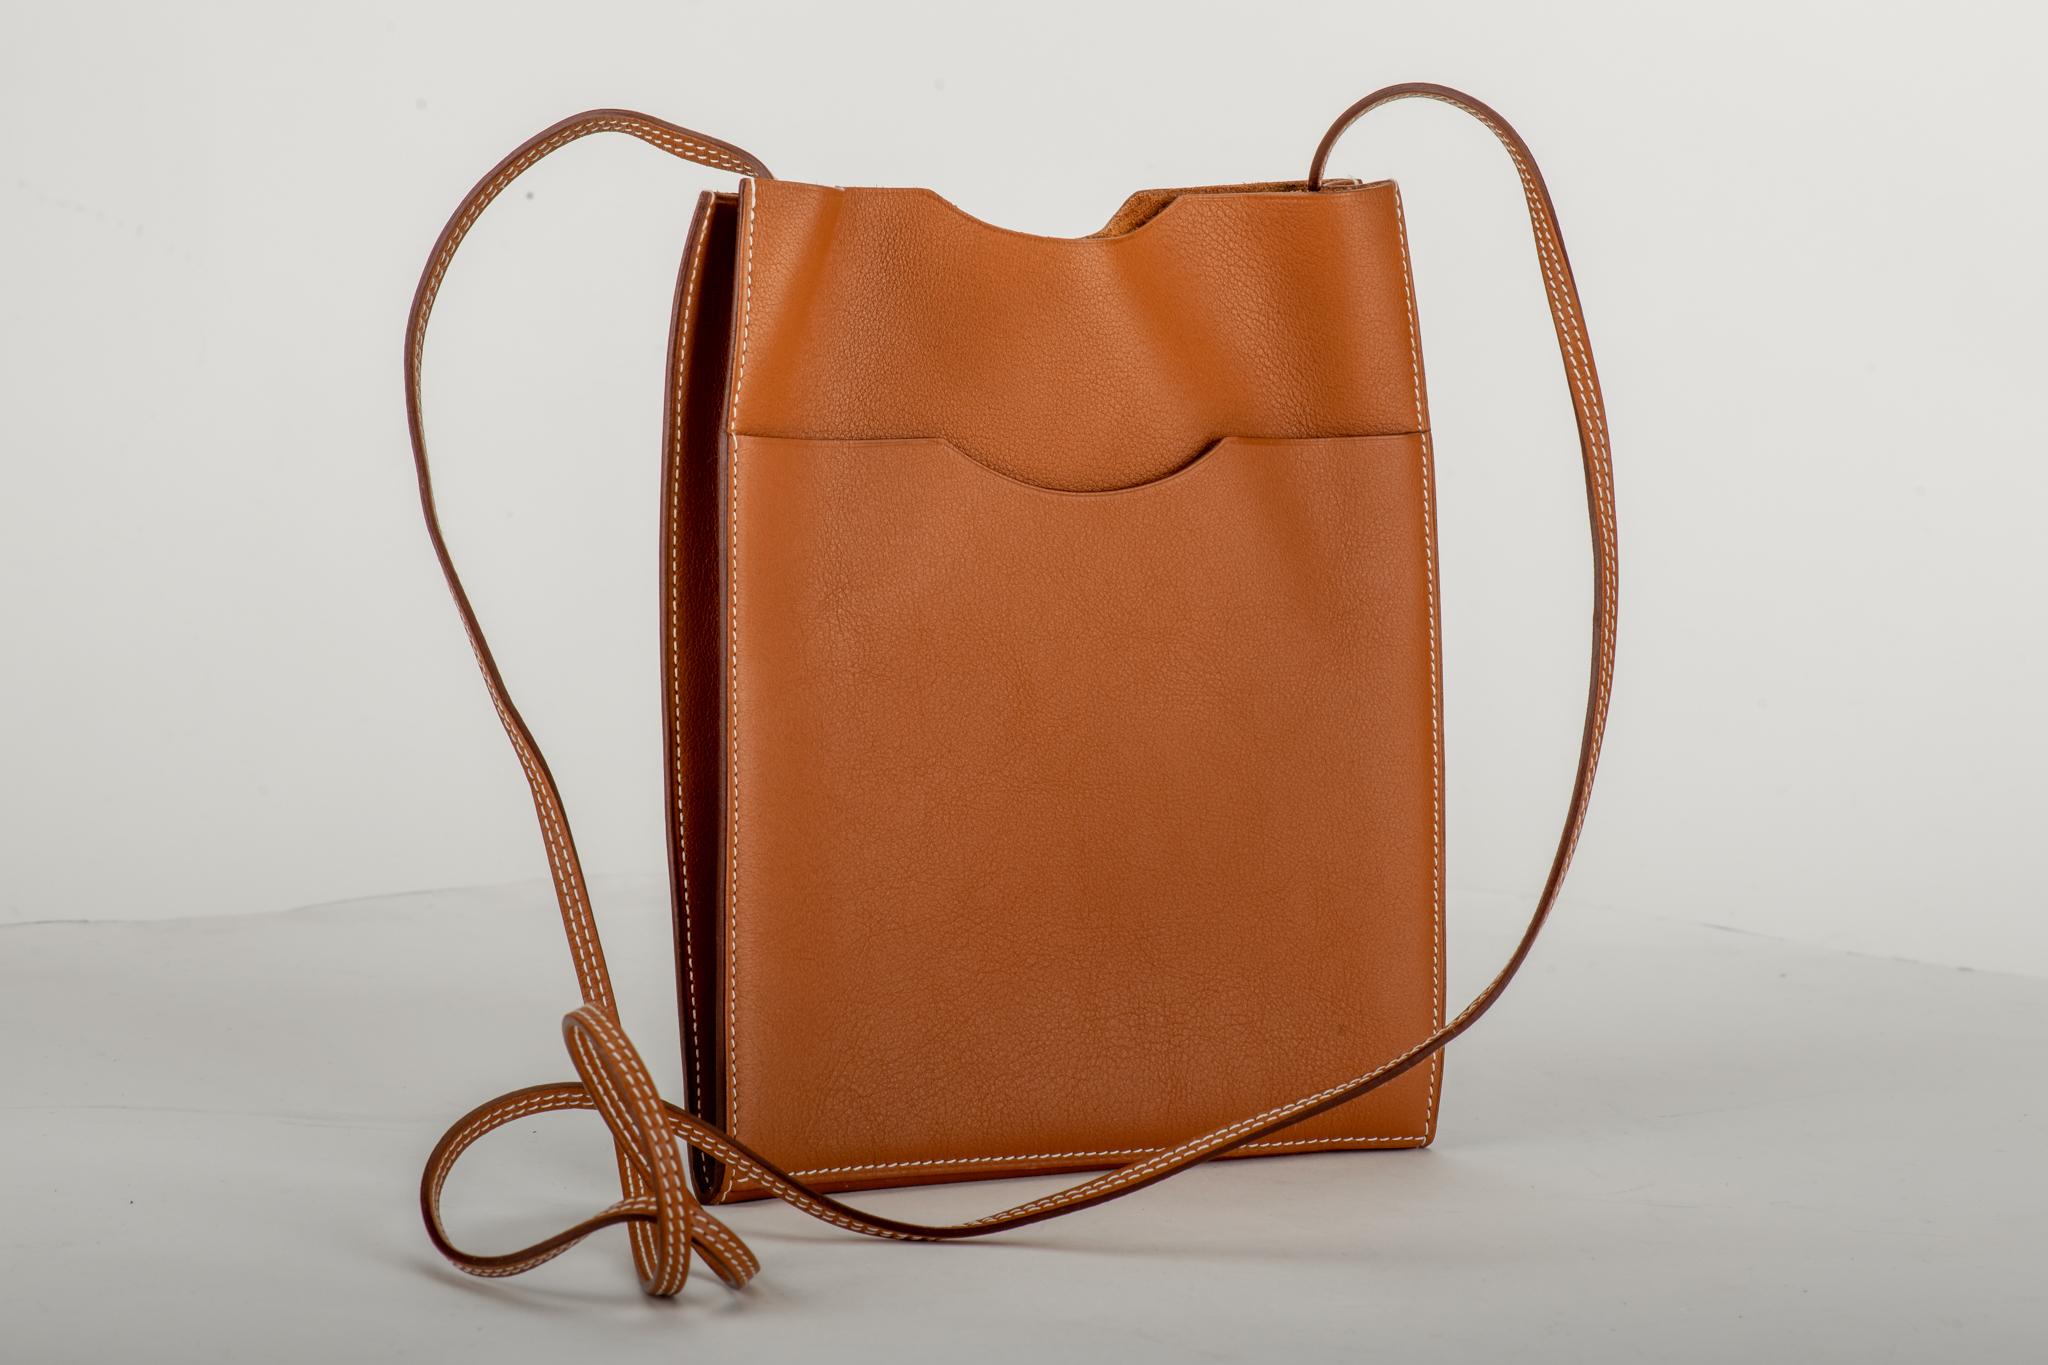 Hermès small crossbody bag in caramel swift leather with a back pocket. Comes with original dust cover. Minor wear on leather.